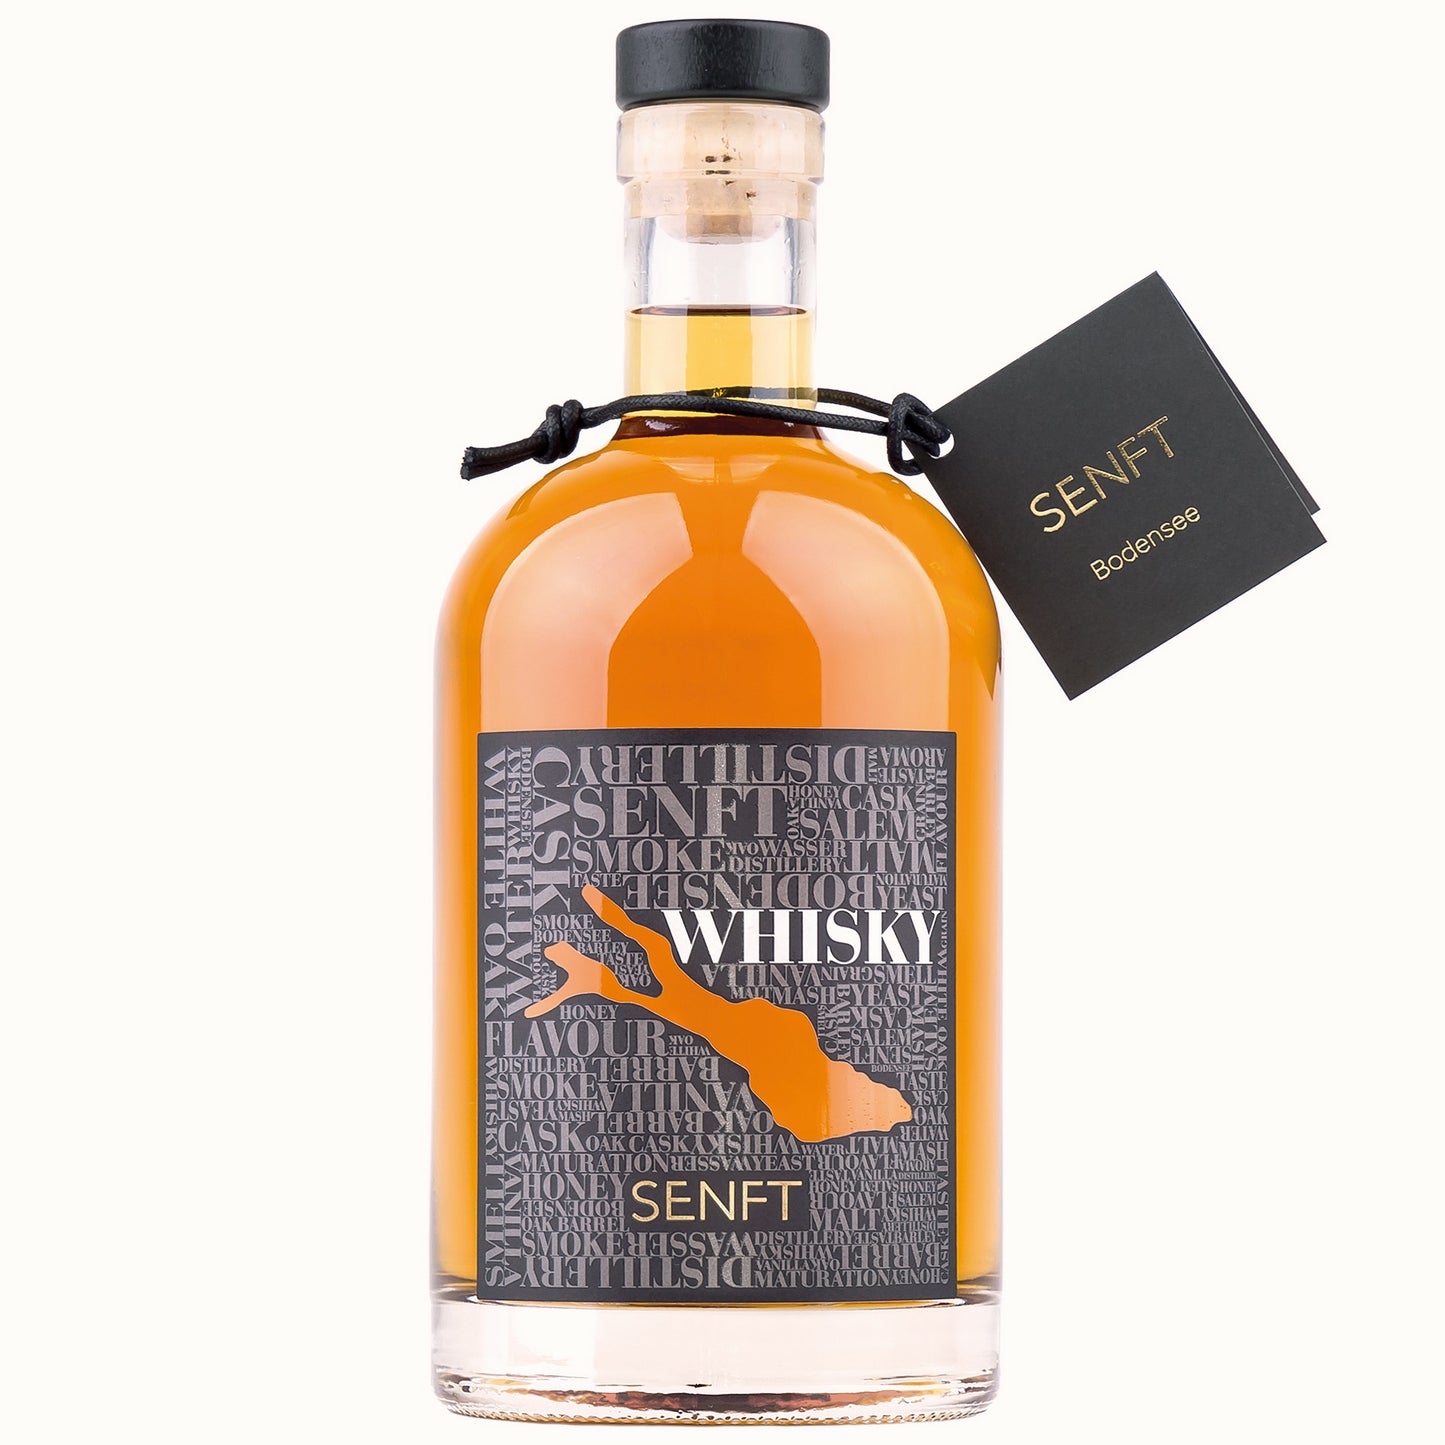 Bodensee Whisky 42%vol. 7 Jahre 0,7l